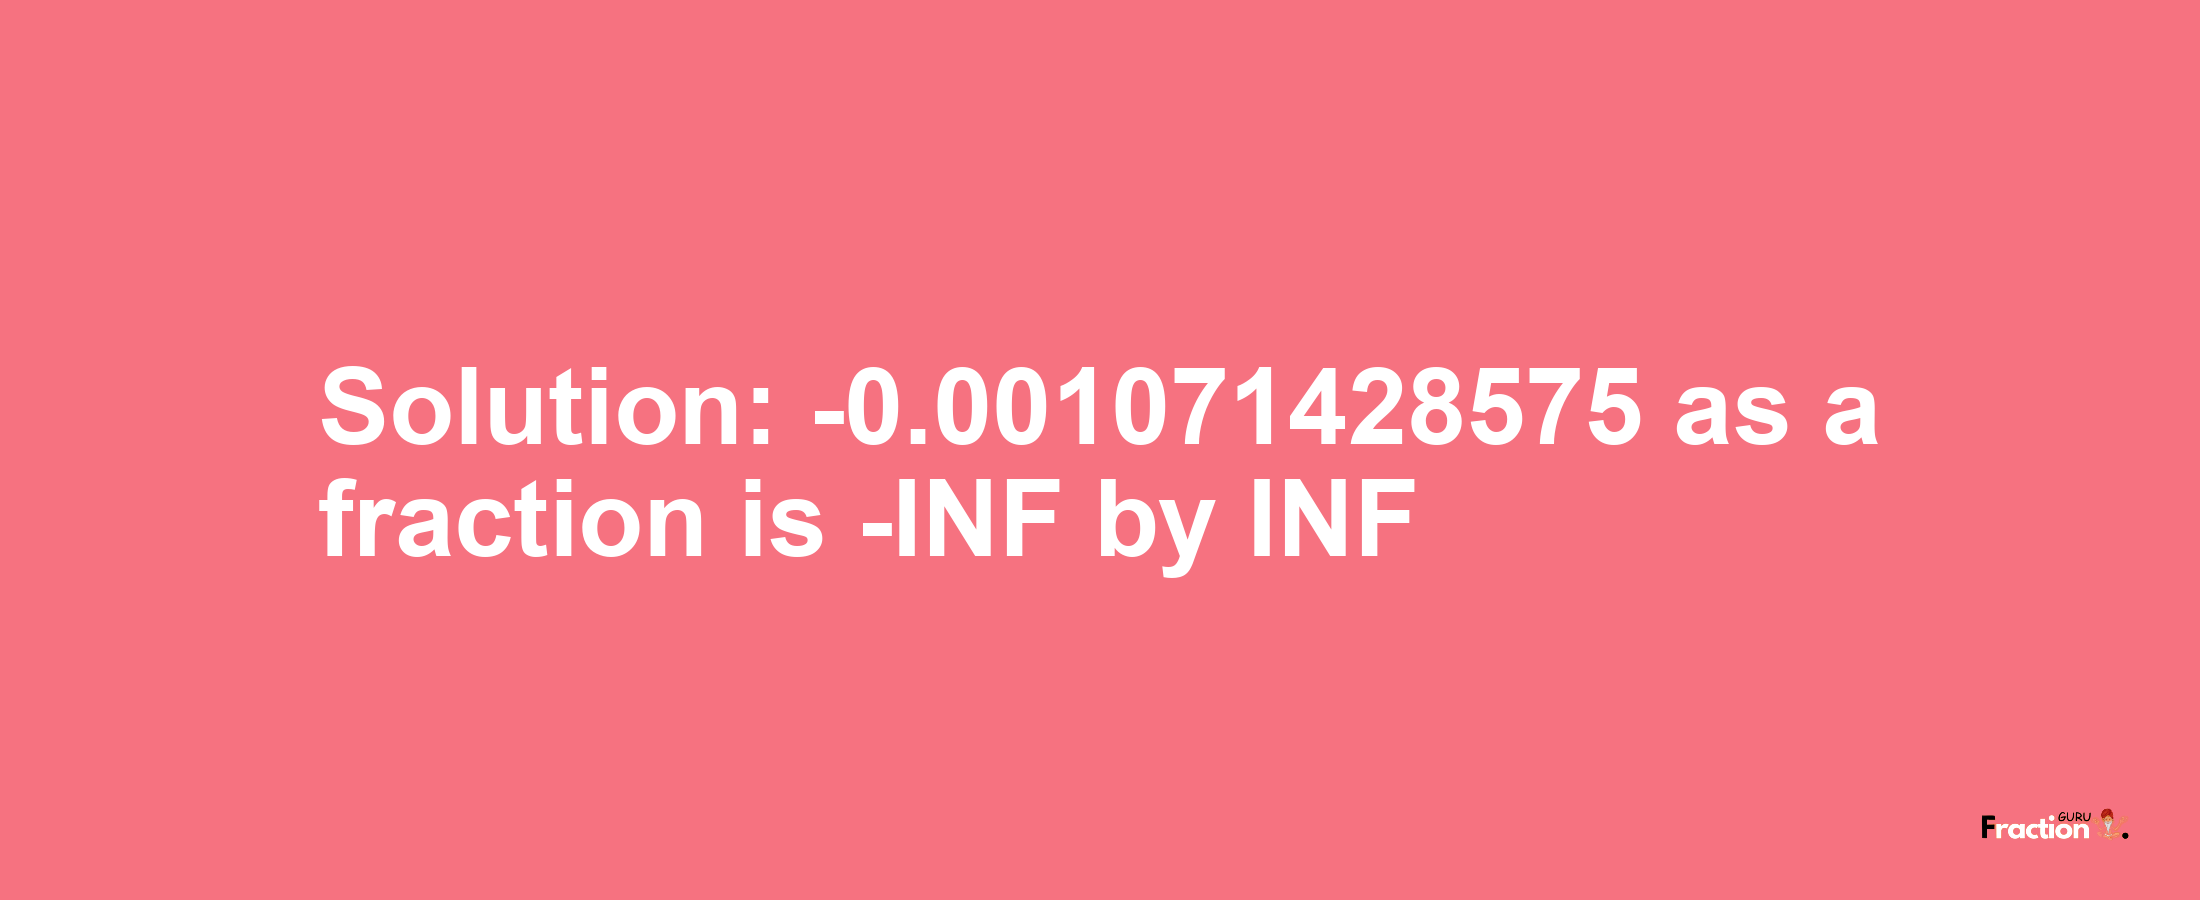 Solution:-0.001071428575 as a fraction is -INF/INF